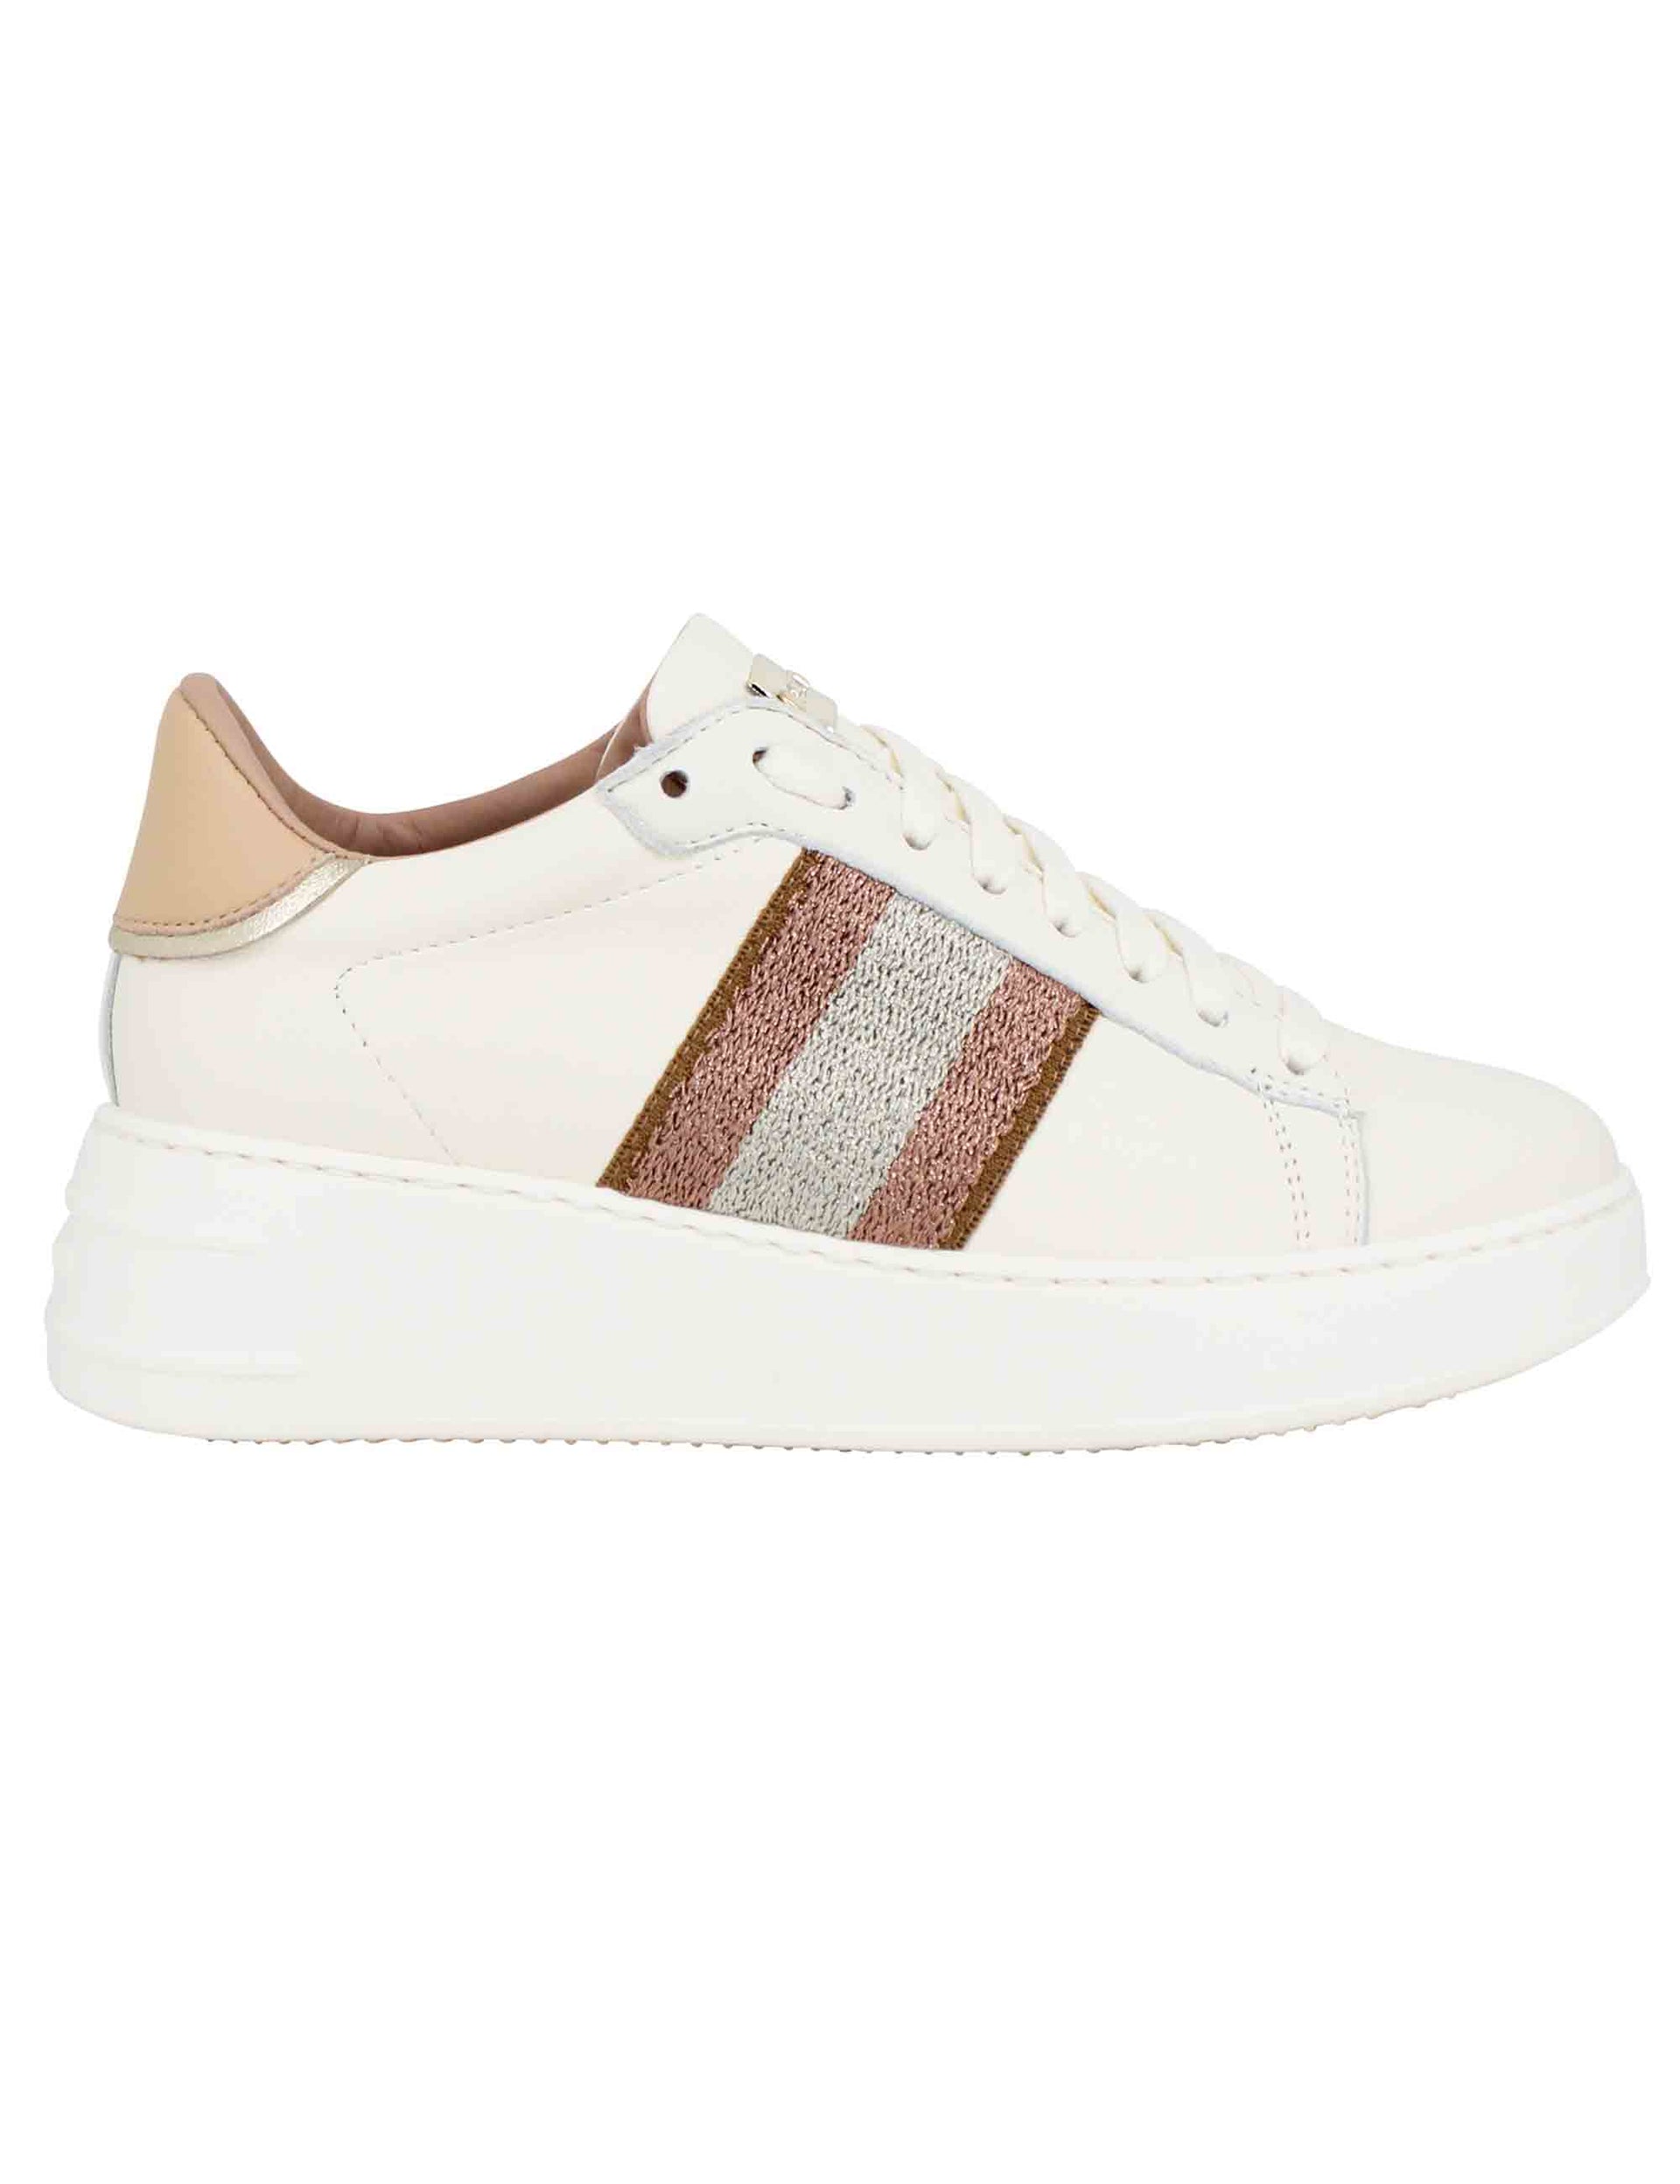 Women's beige leather sneakers with side band